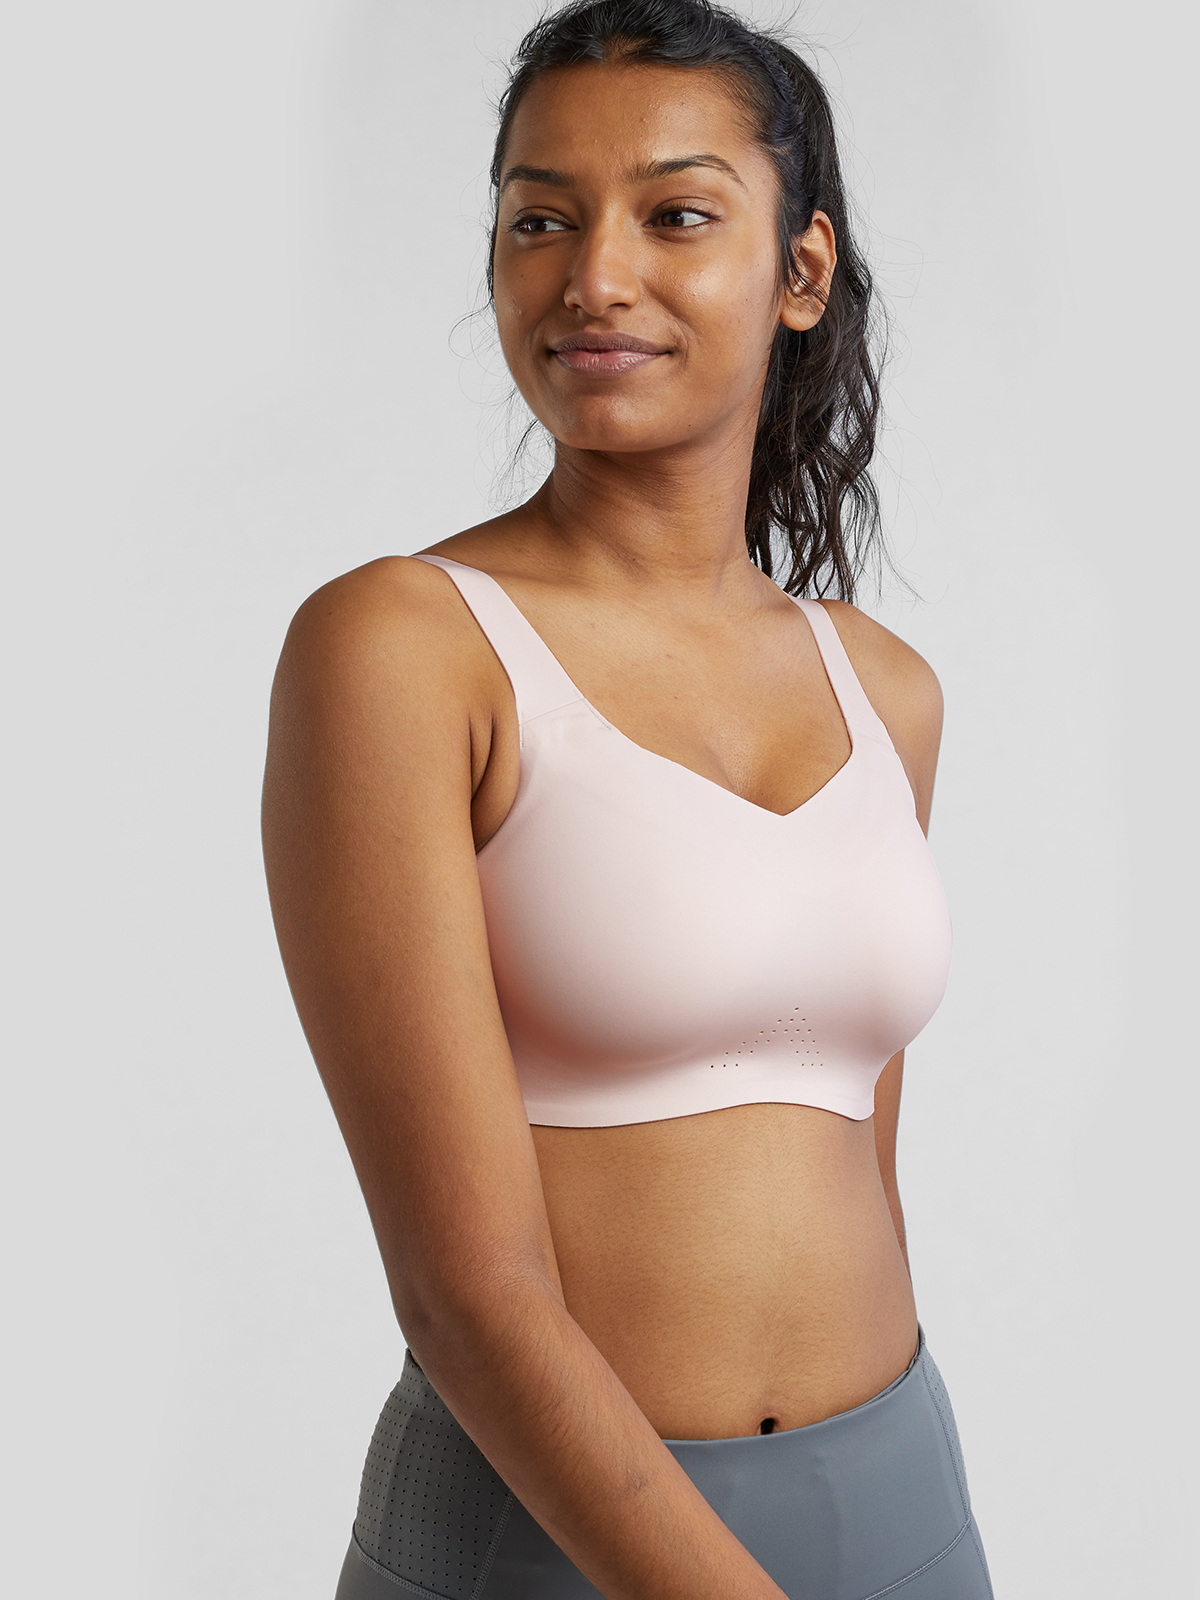 Athletic wear this cute is a lifesaver! Heidi is wearing the Monarch Sports  Bra and Lifesaver Short in Keylime Pie. The Lifesaver Short